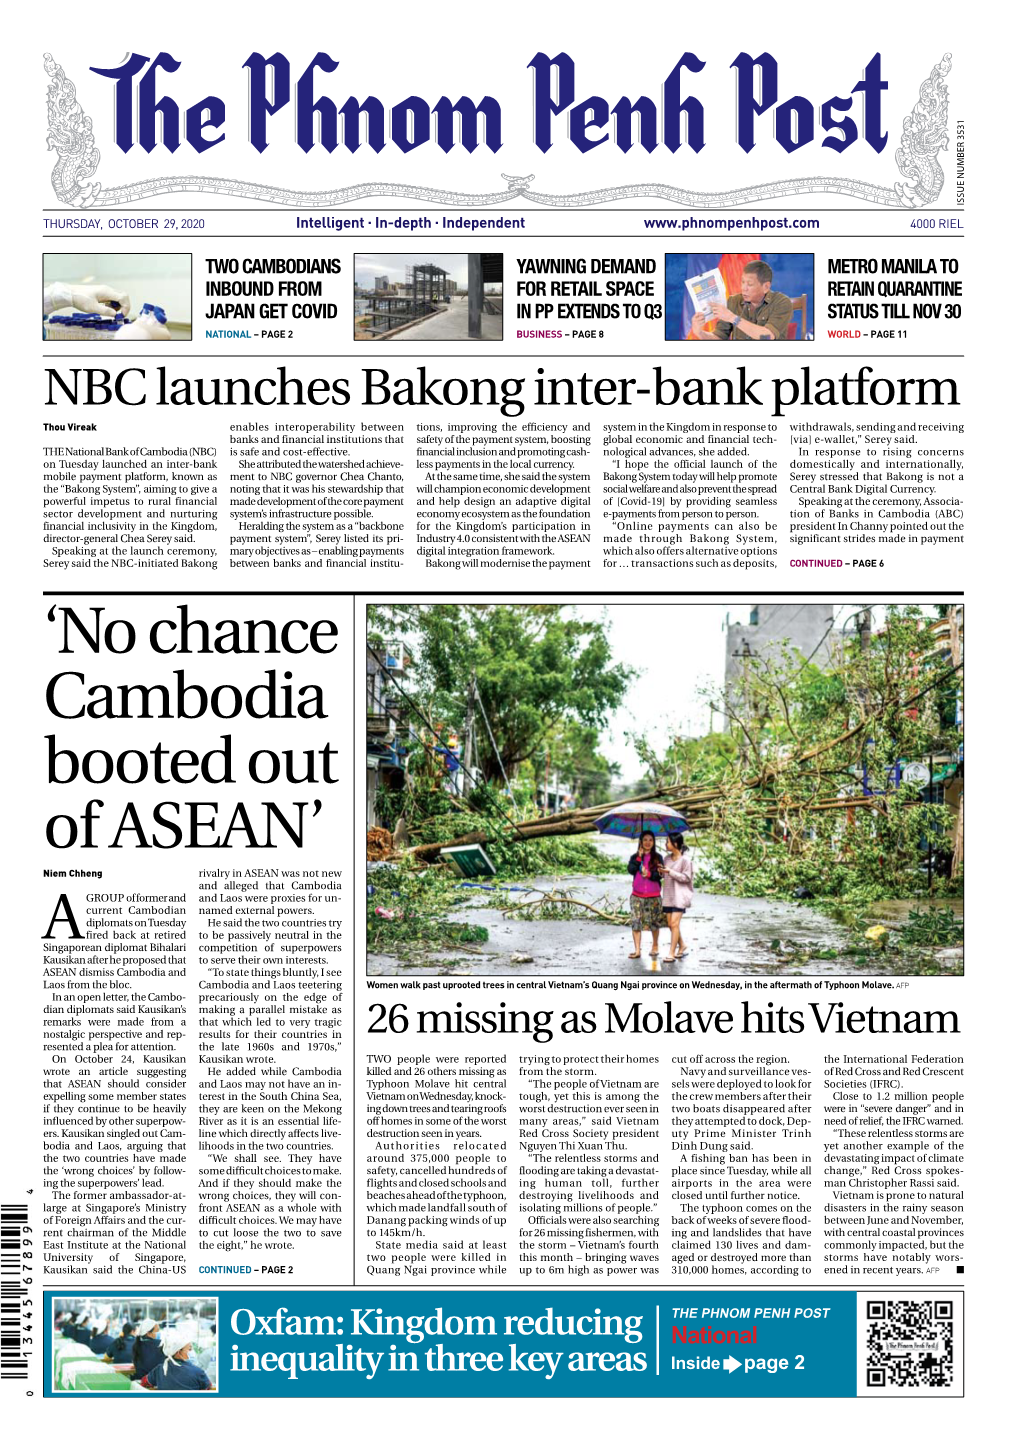 'No Chance Cambodia Booted out of ASEAN'